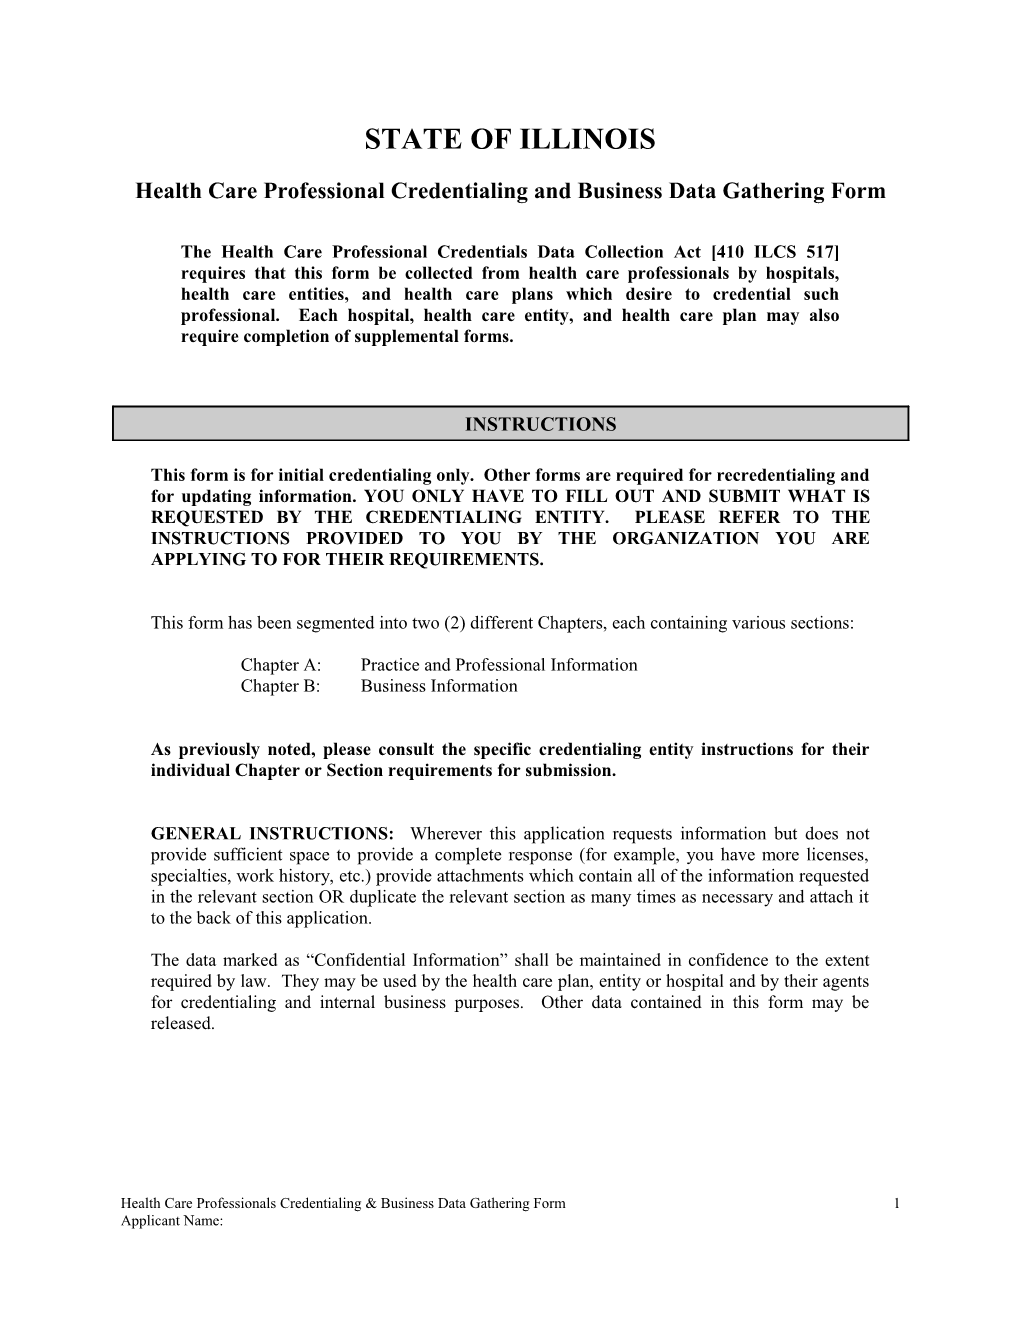 Health Care Professional Credentialing and Business Data Gathering Form